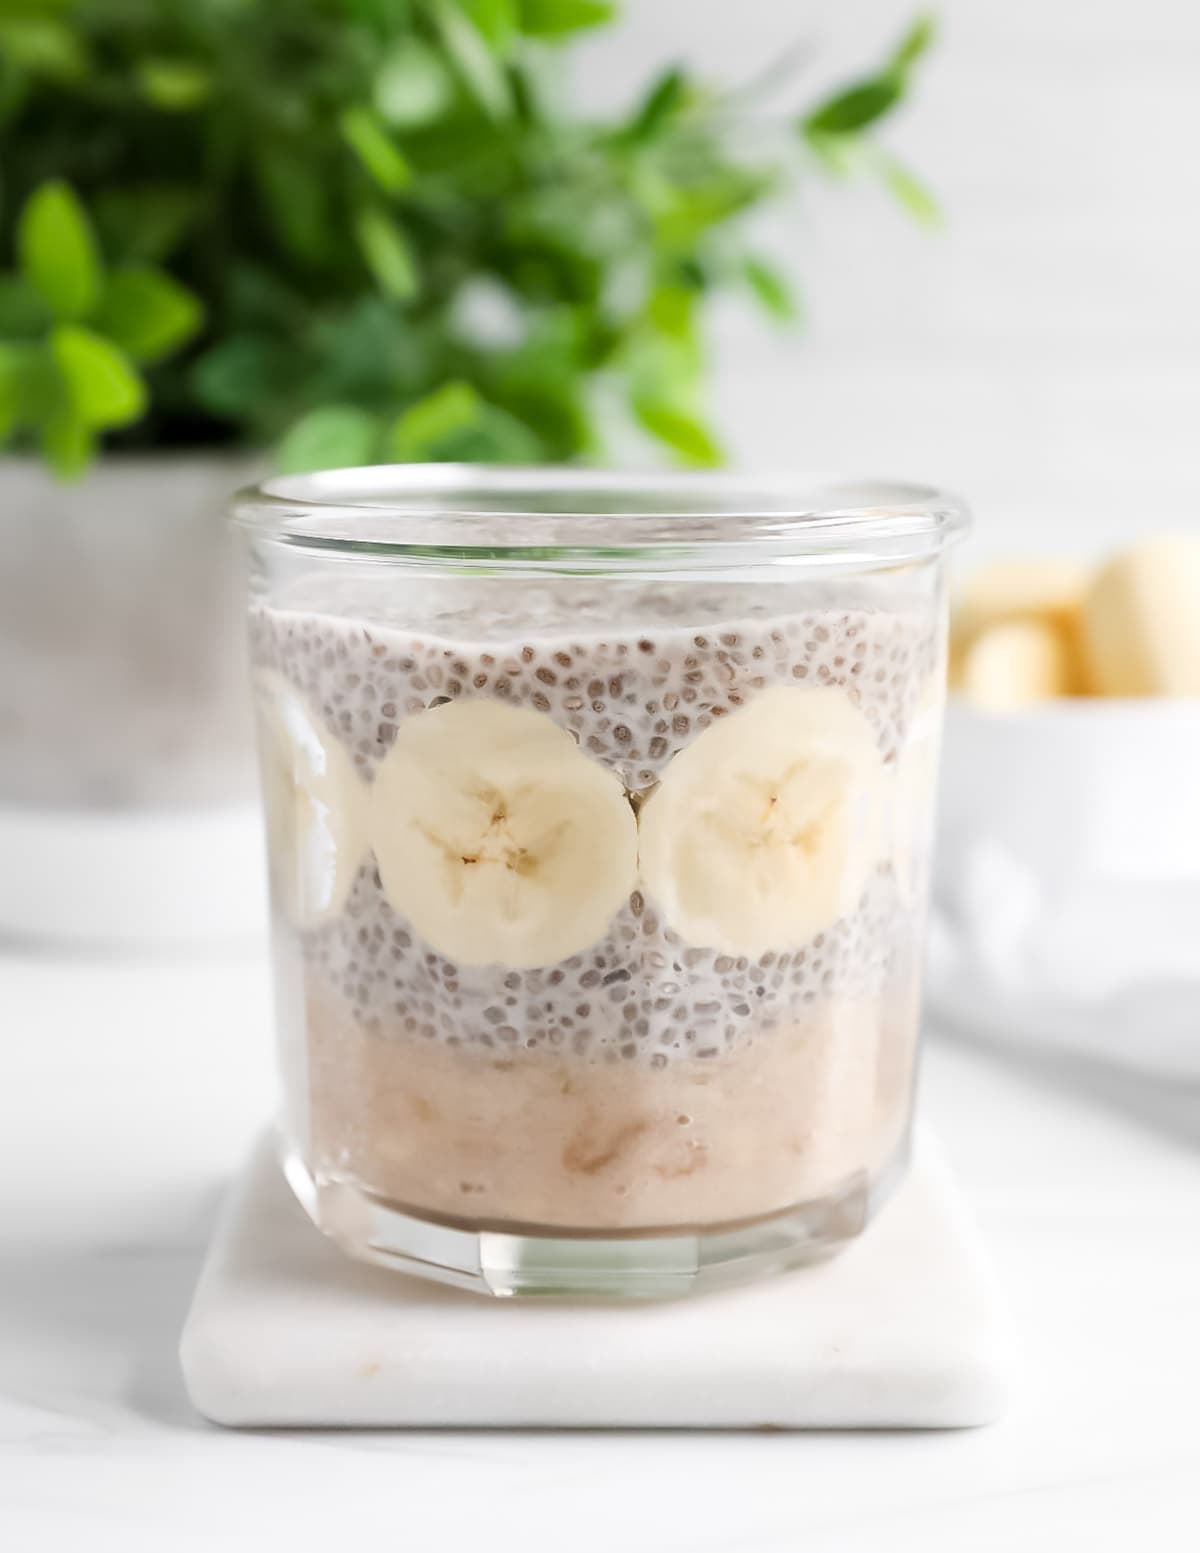 A clear glass jar filled with bananas and chia seed pudding.